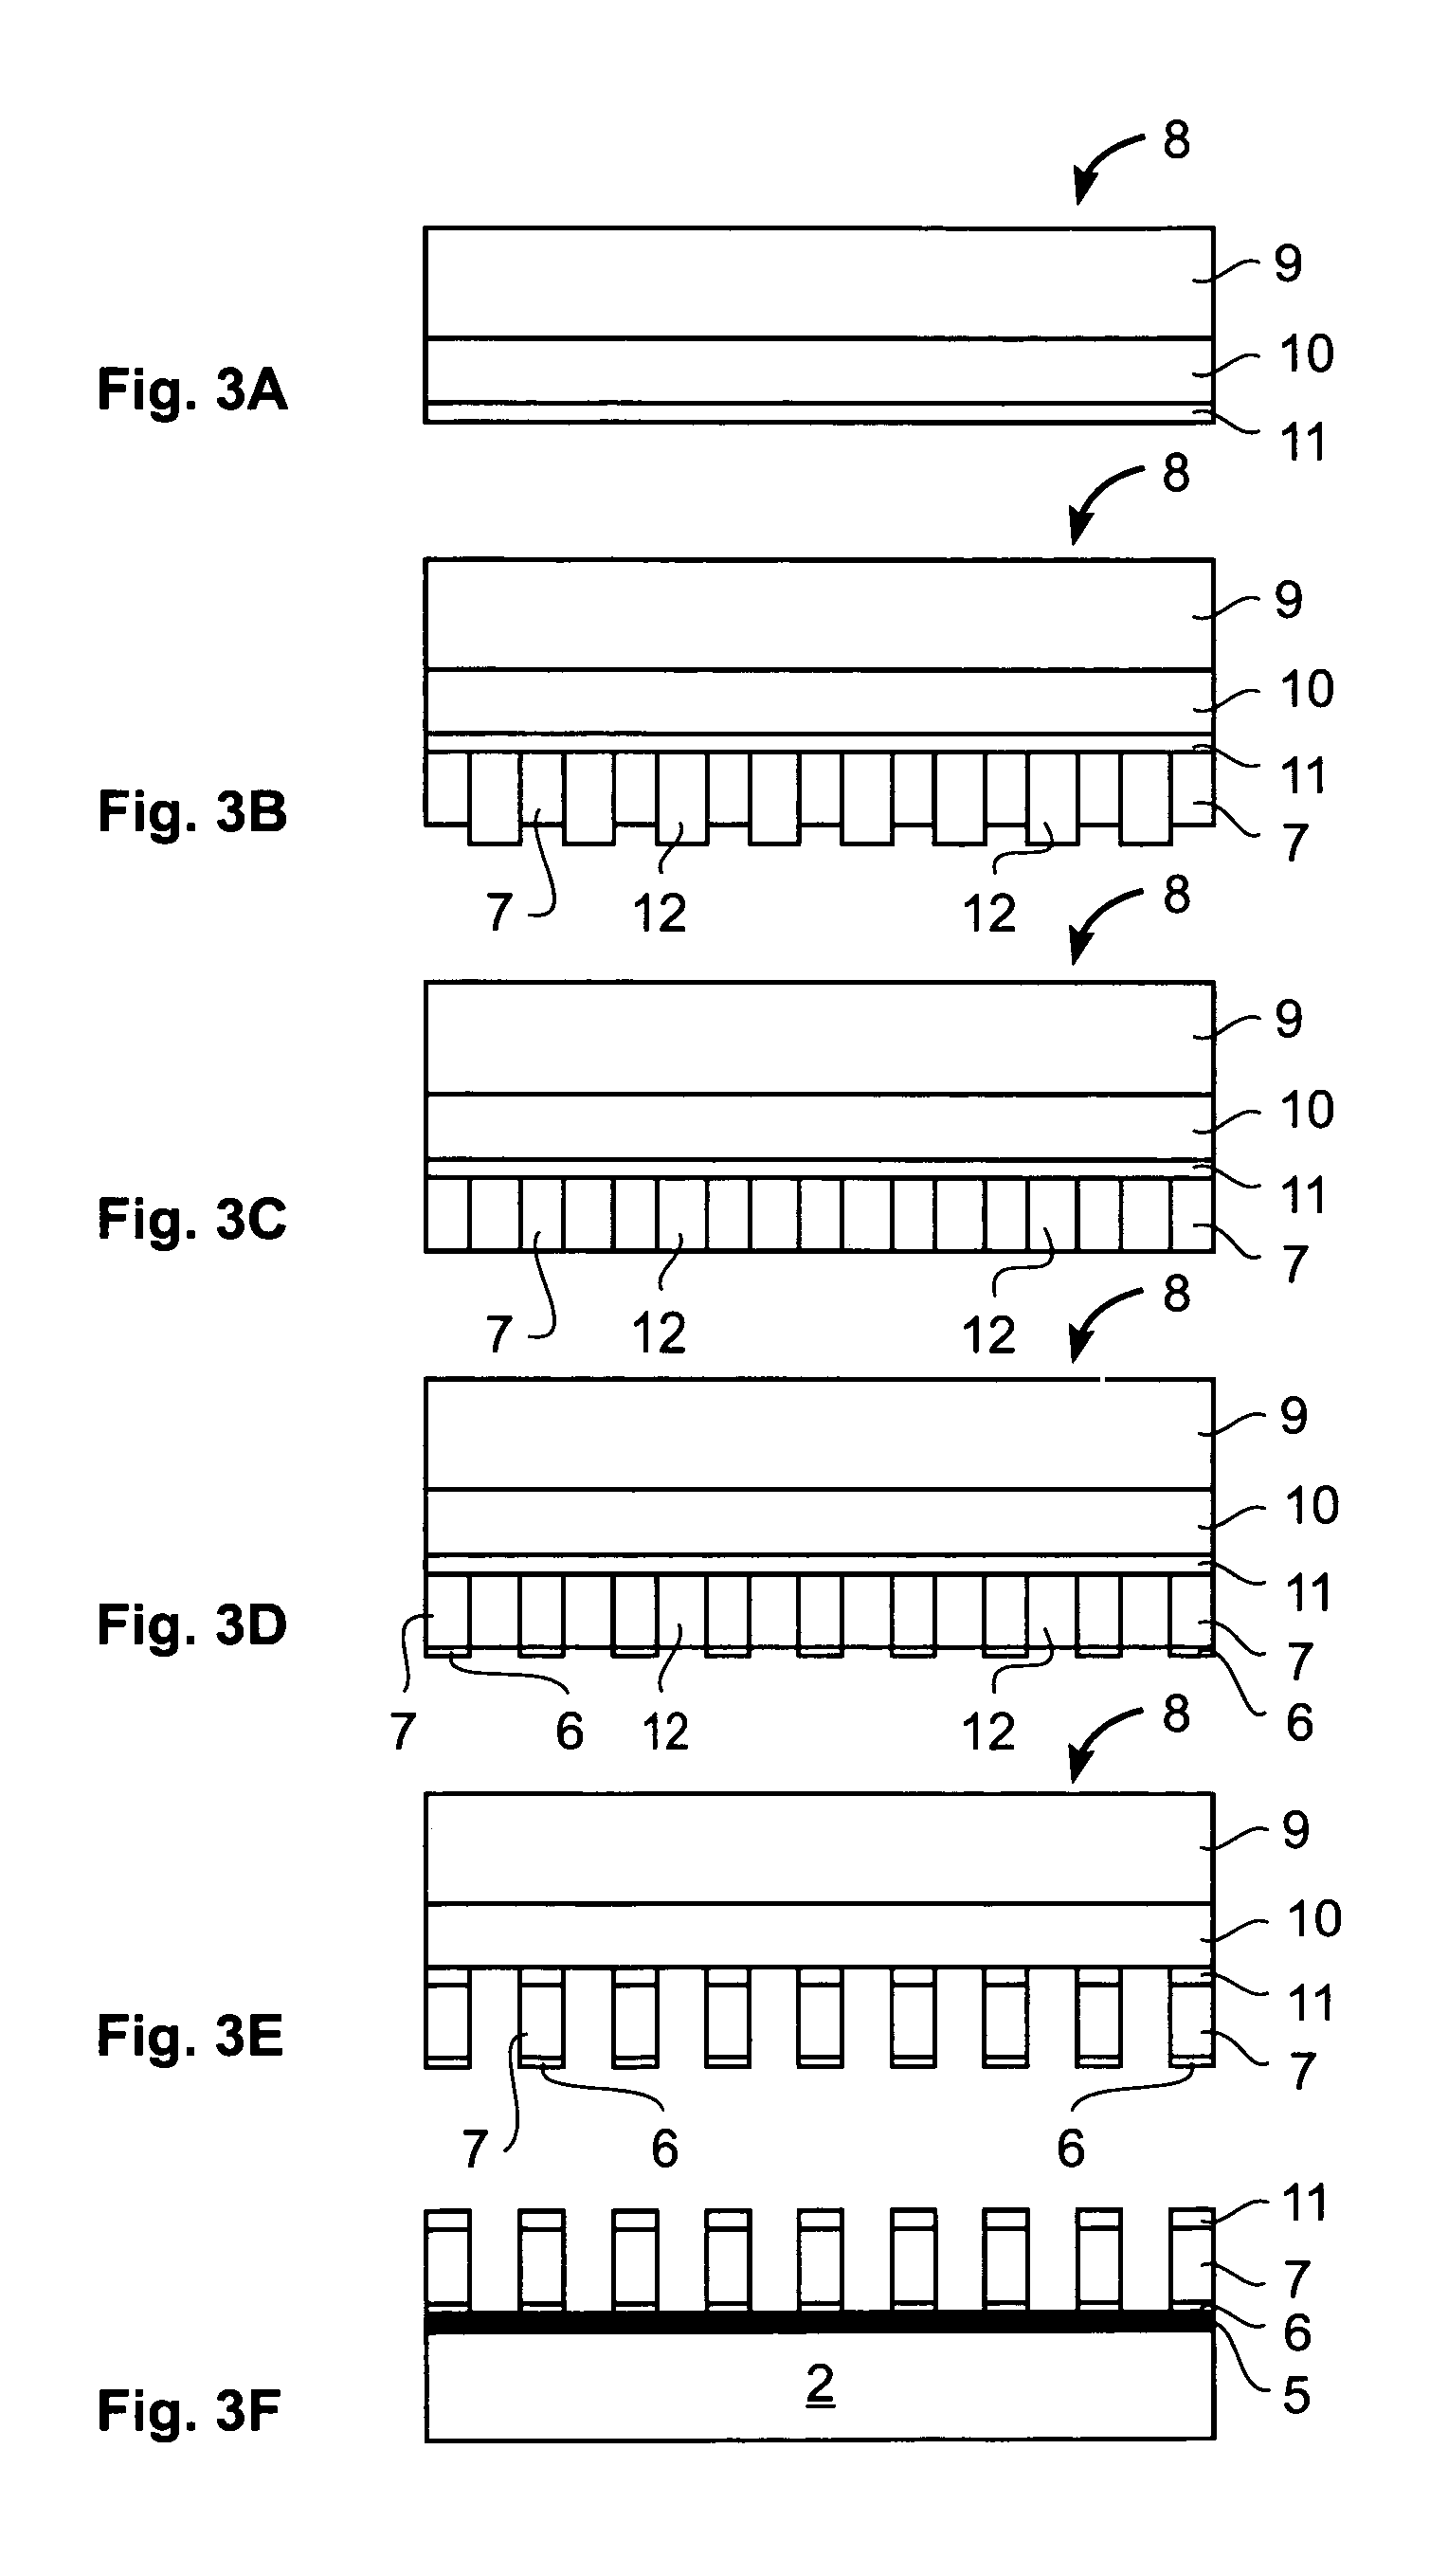 Semiconductor device with a high thermal dissipation efficiency